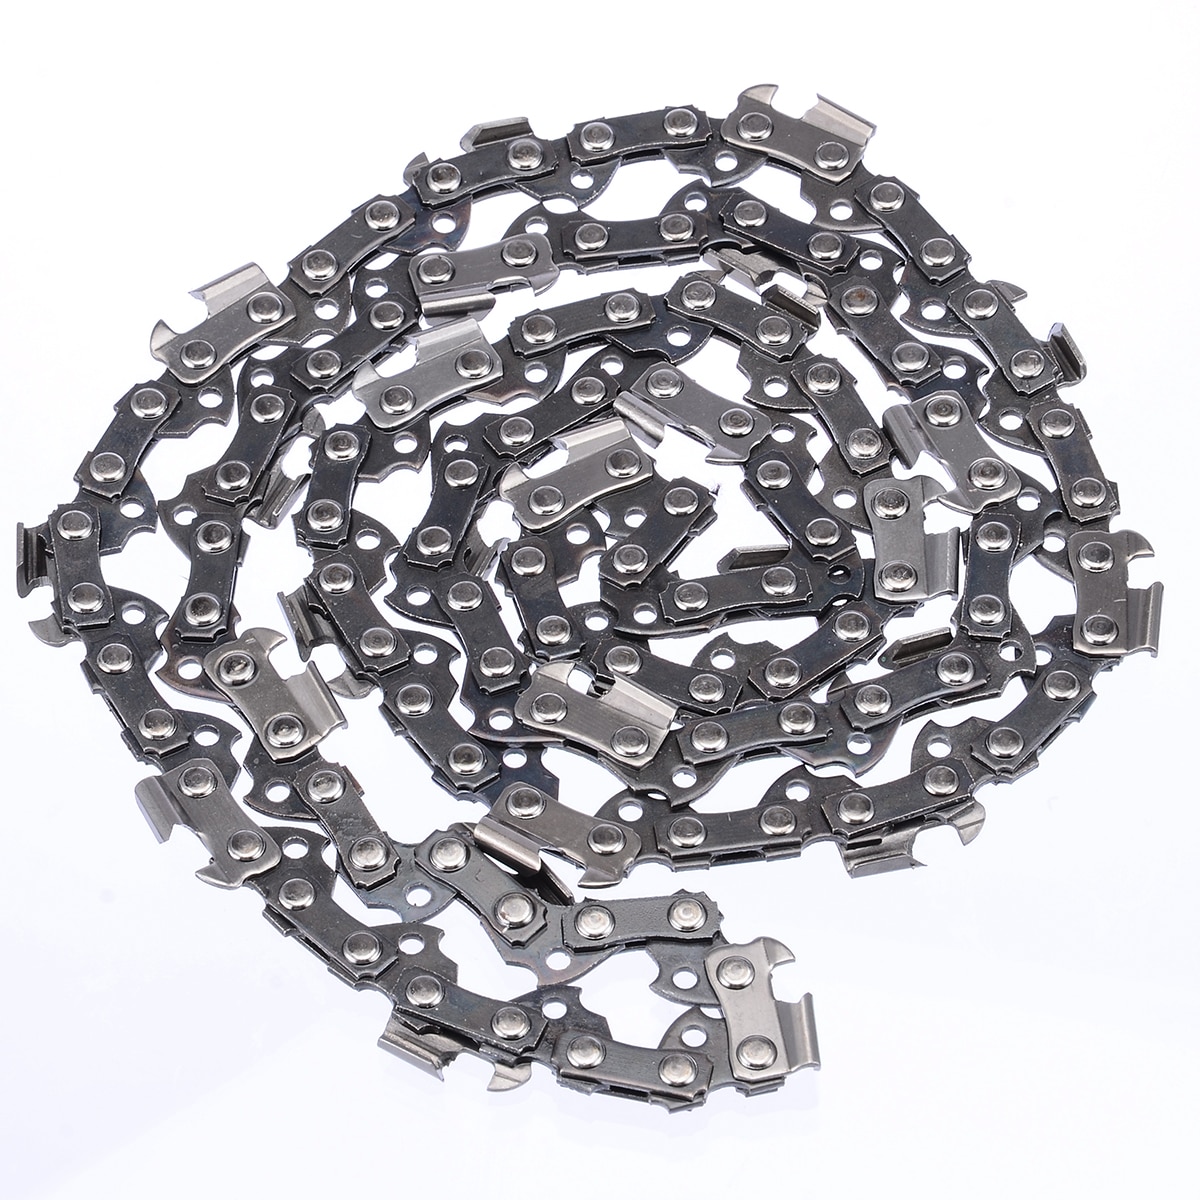 16" Chainsaw Saw Chain Blade For 3/8"LP .050 56DL Shape Blade Saw Chain for Wood cutting Chainsaw Parts